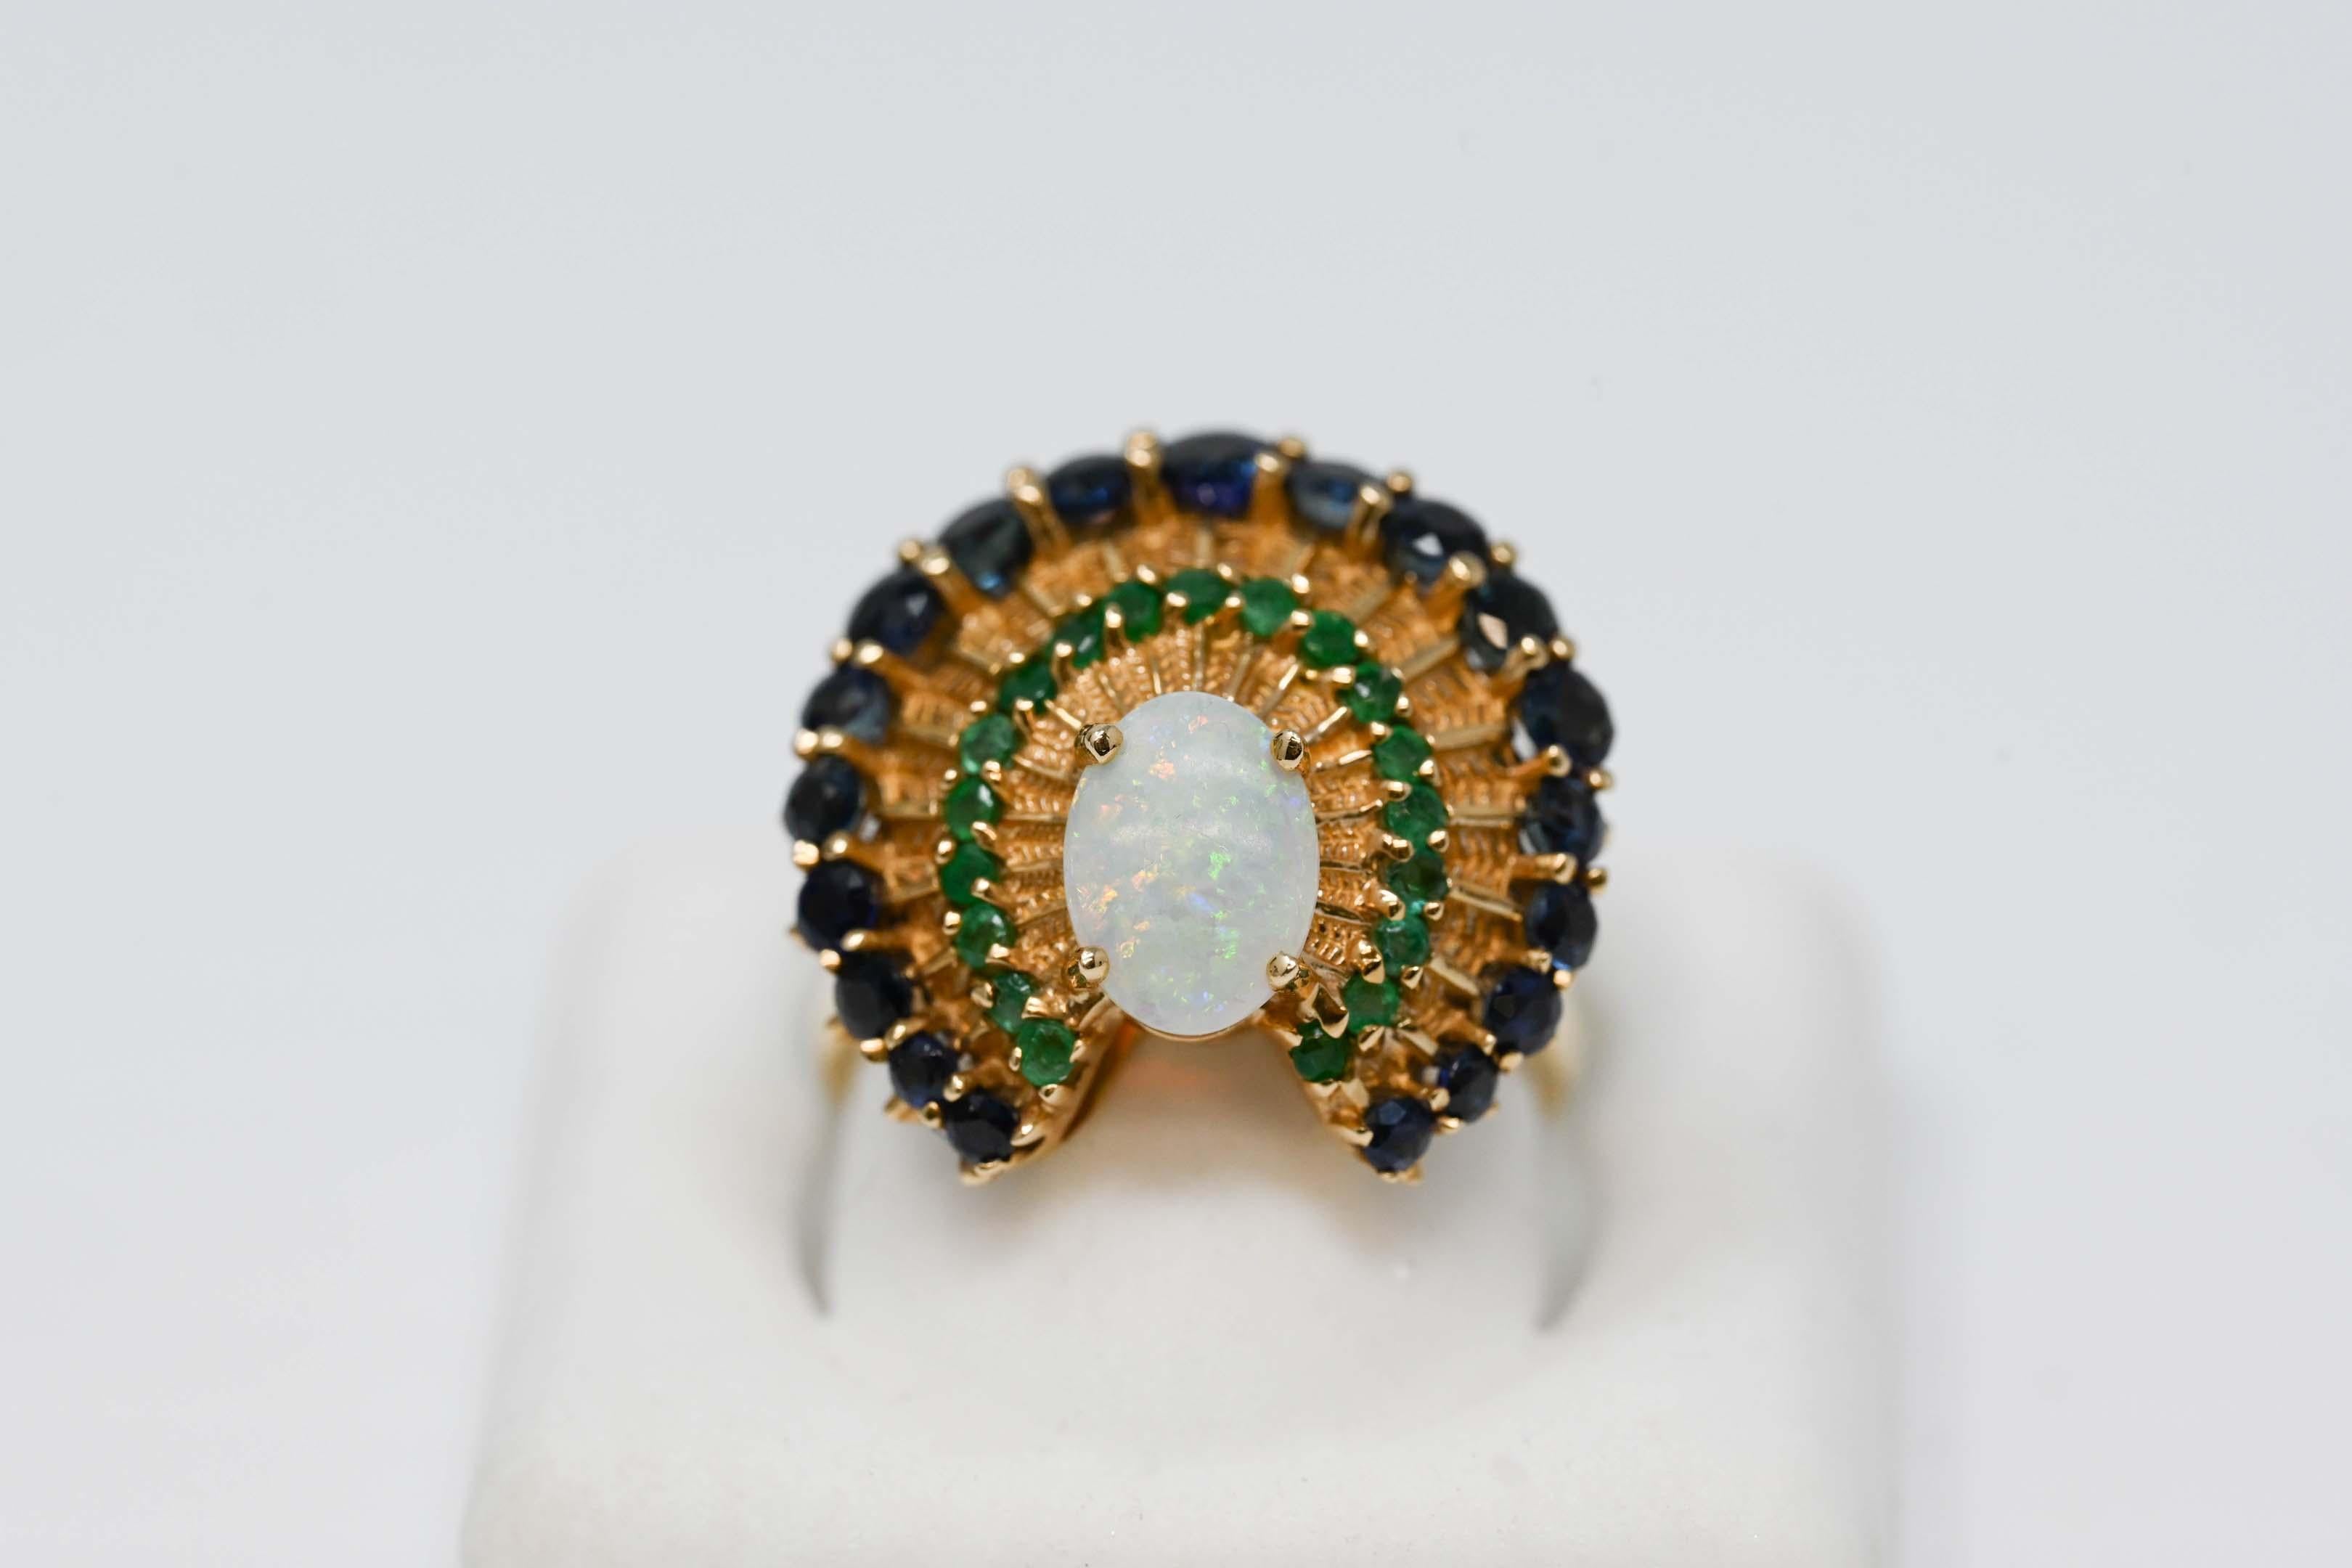 Franklin Mint 1988 14k gold 8 x 6mm opal, emerald and sapphire gemstone. Peacock design ladies ring size 6.25. Stamped on the inside F.M. 88. 14k, weighs 6.9 grams. Maker is Franklin Mint.
